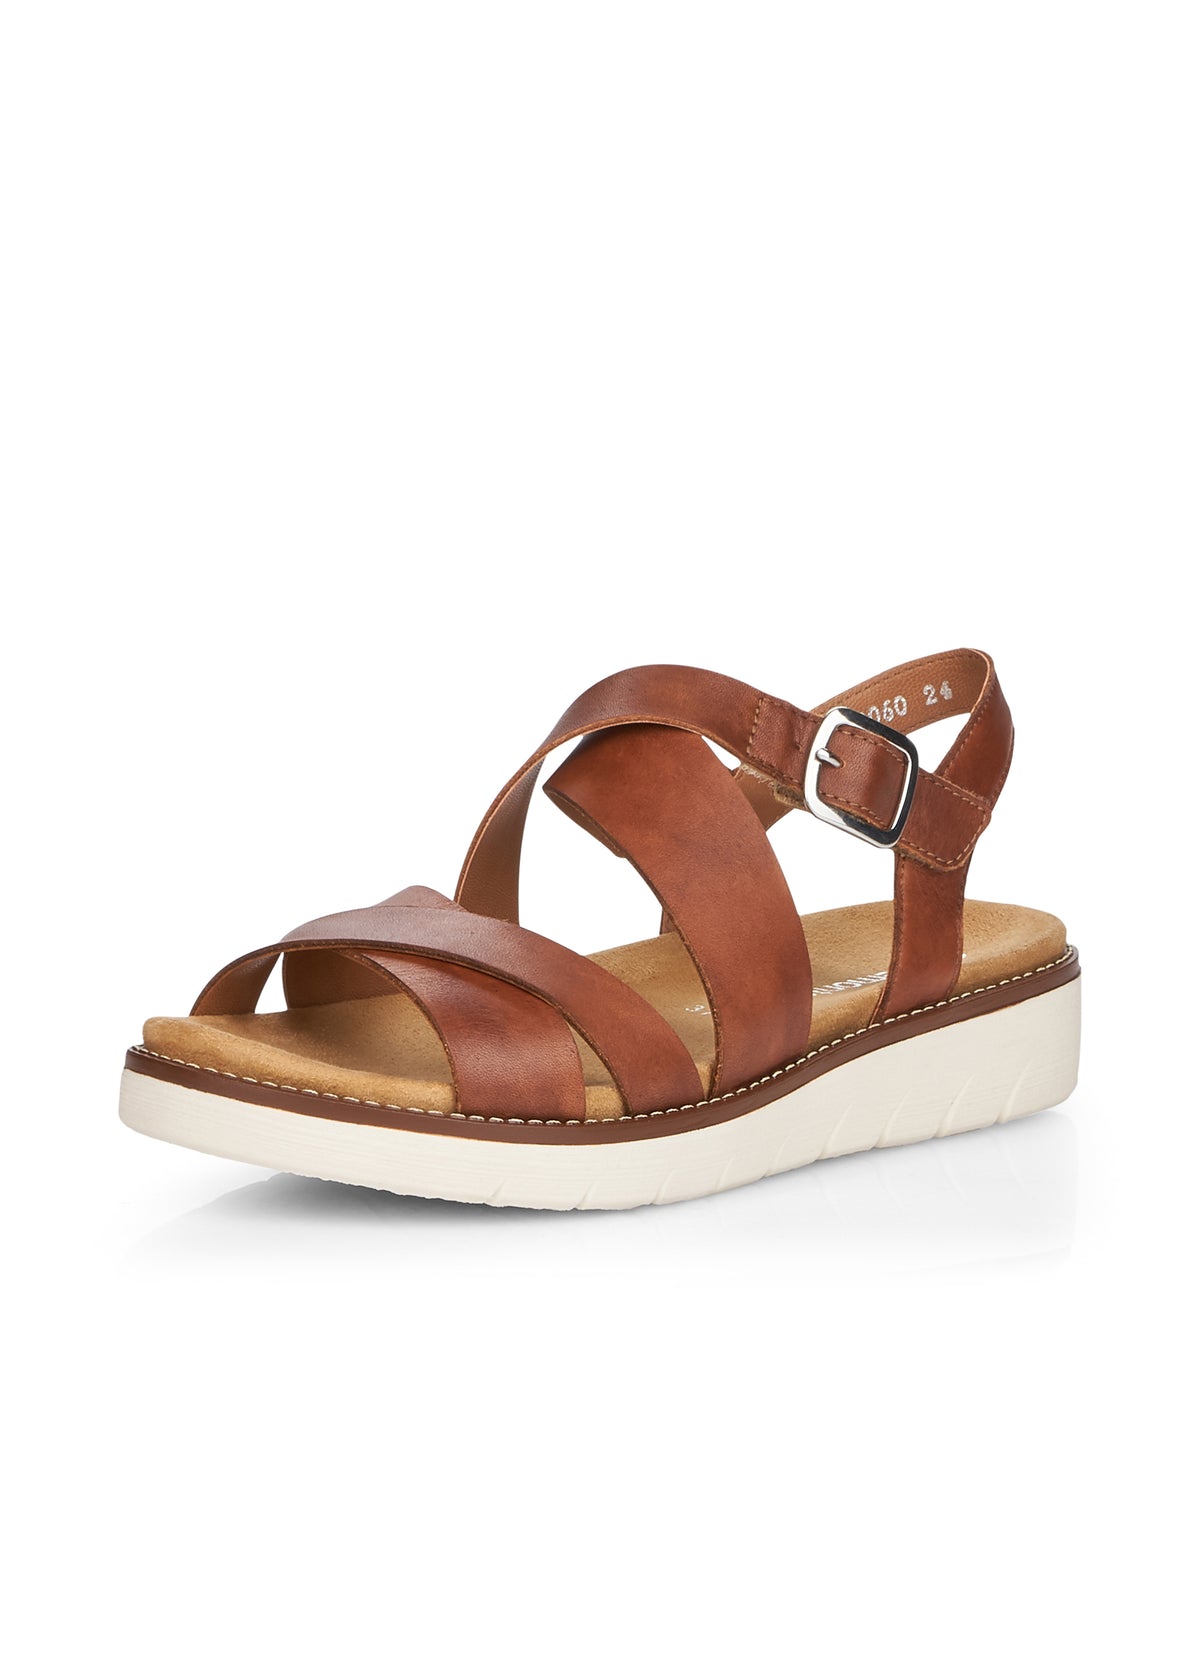 Sandals with straps - brown leather, light sole